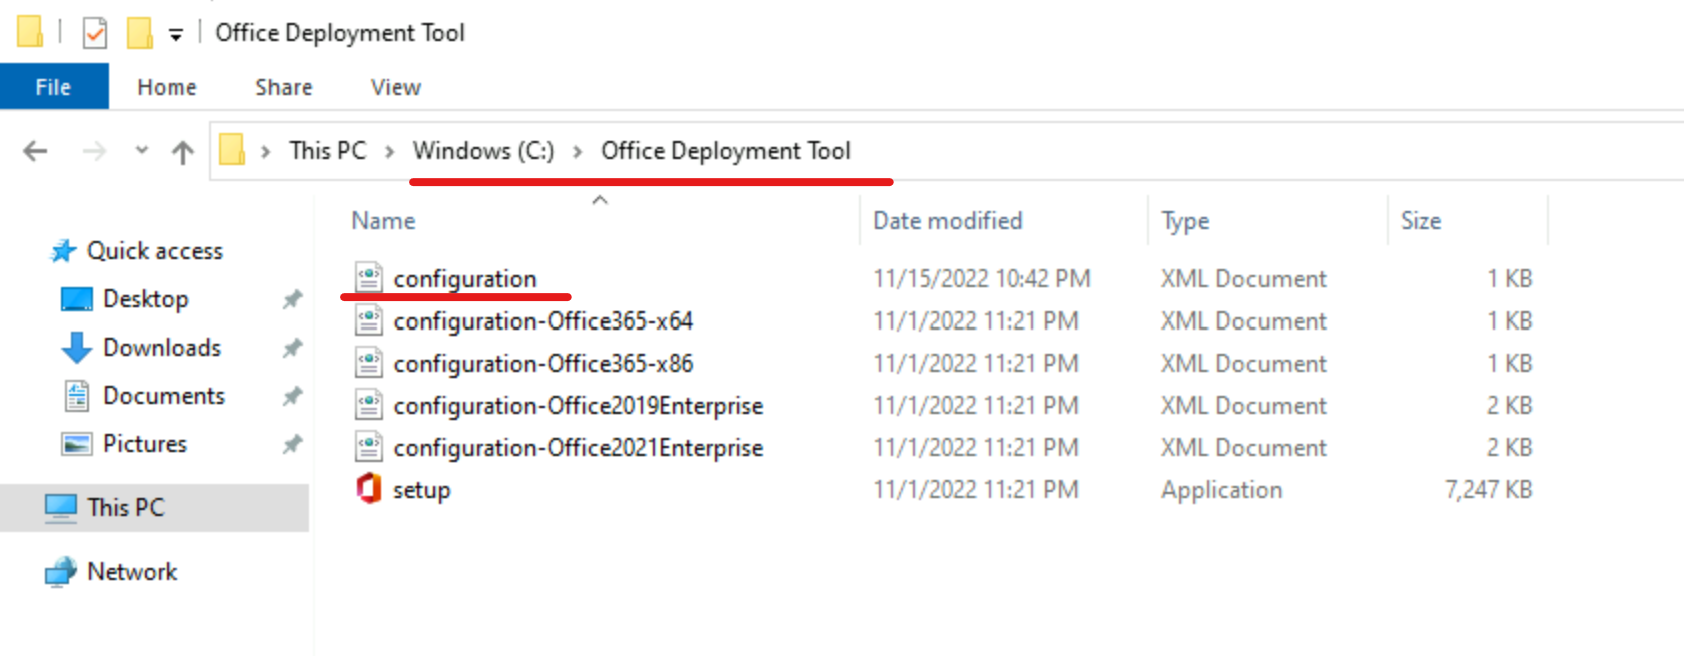 office deployment tool files.png